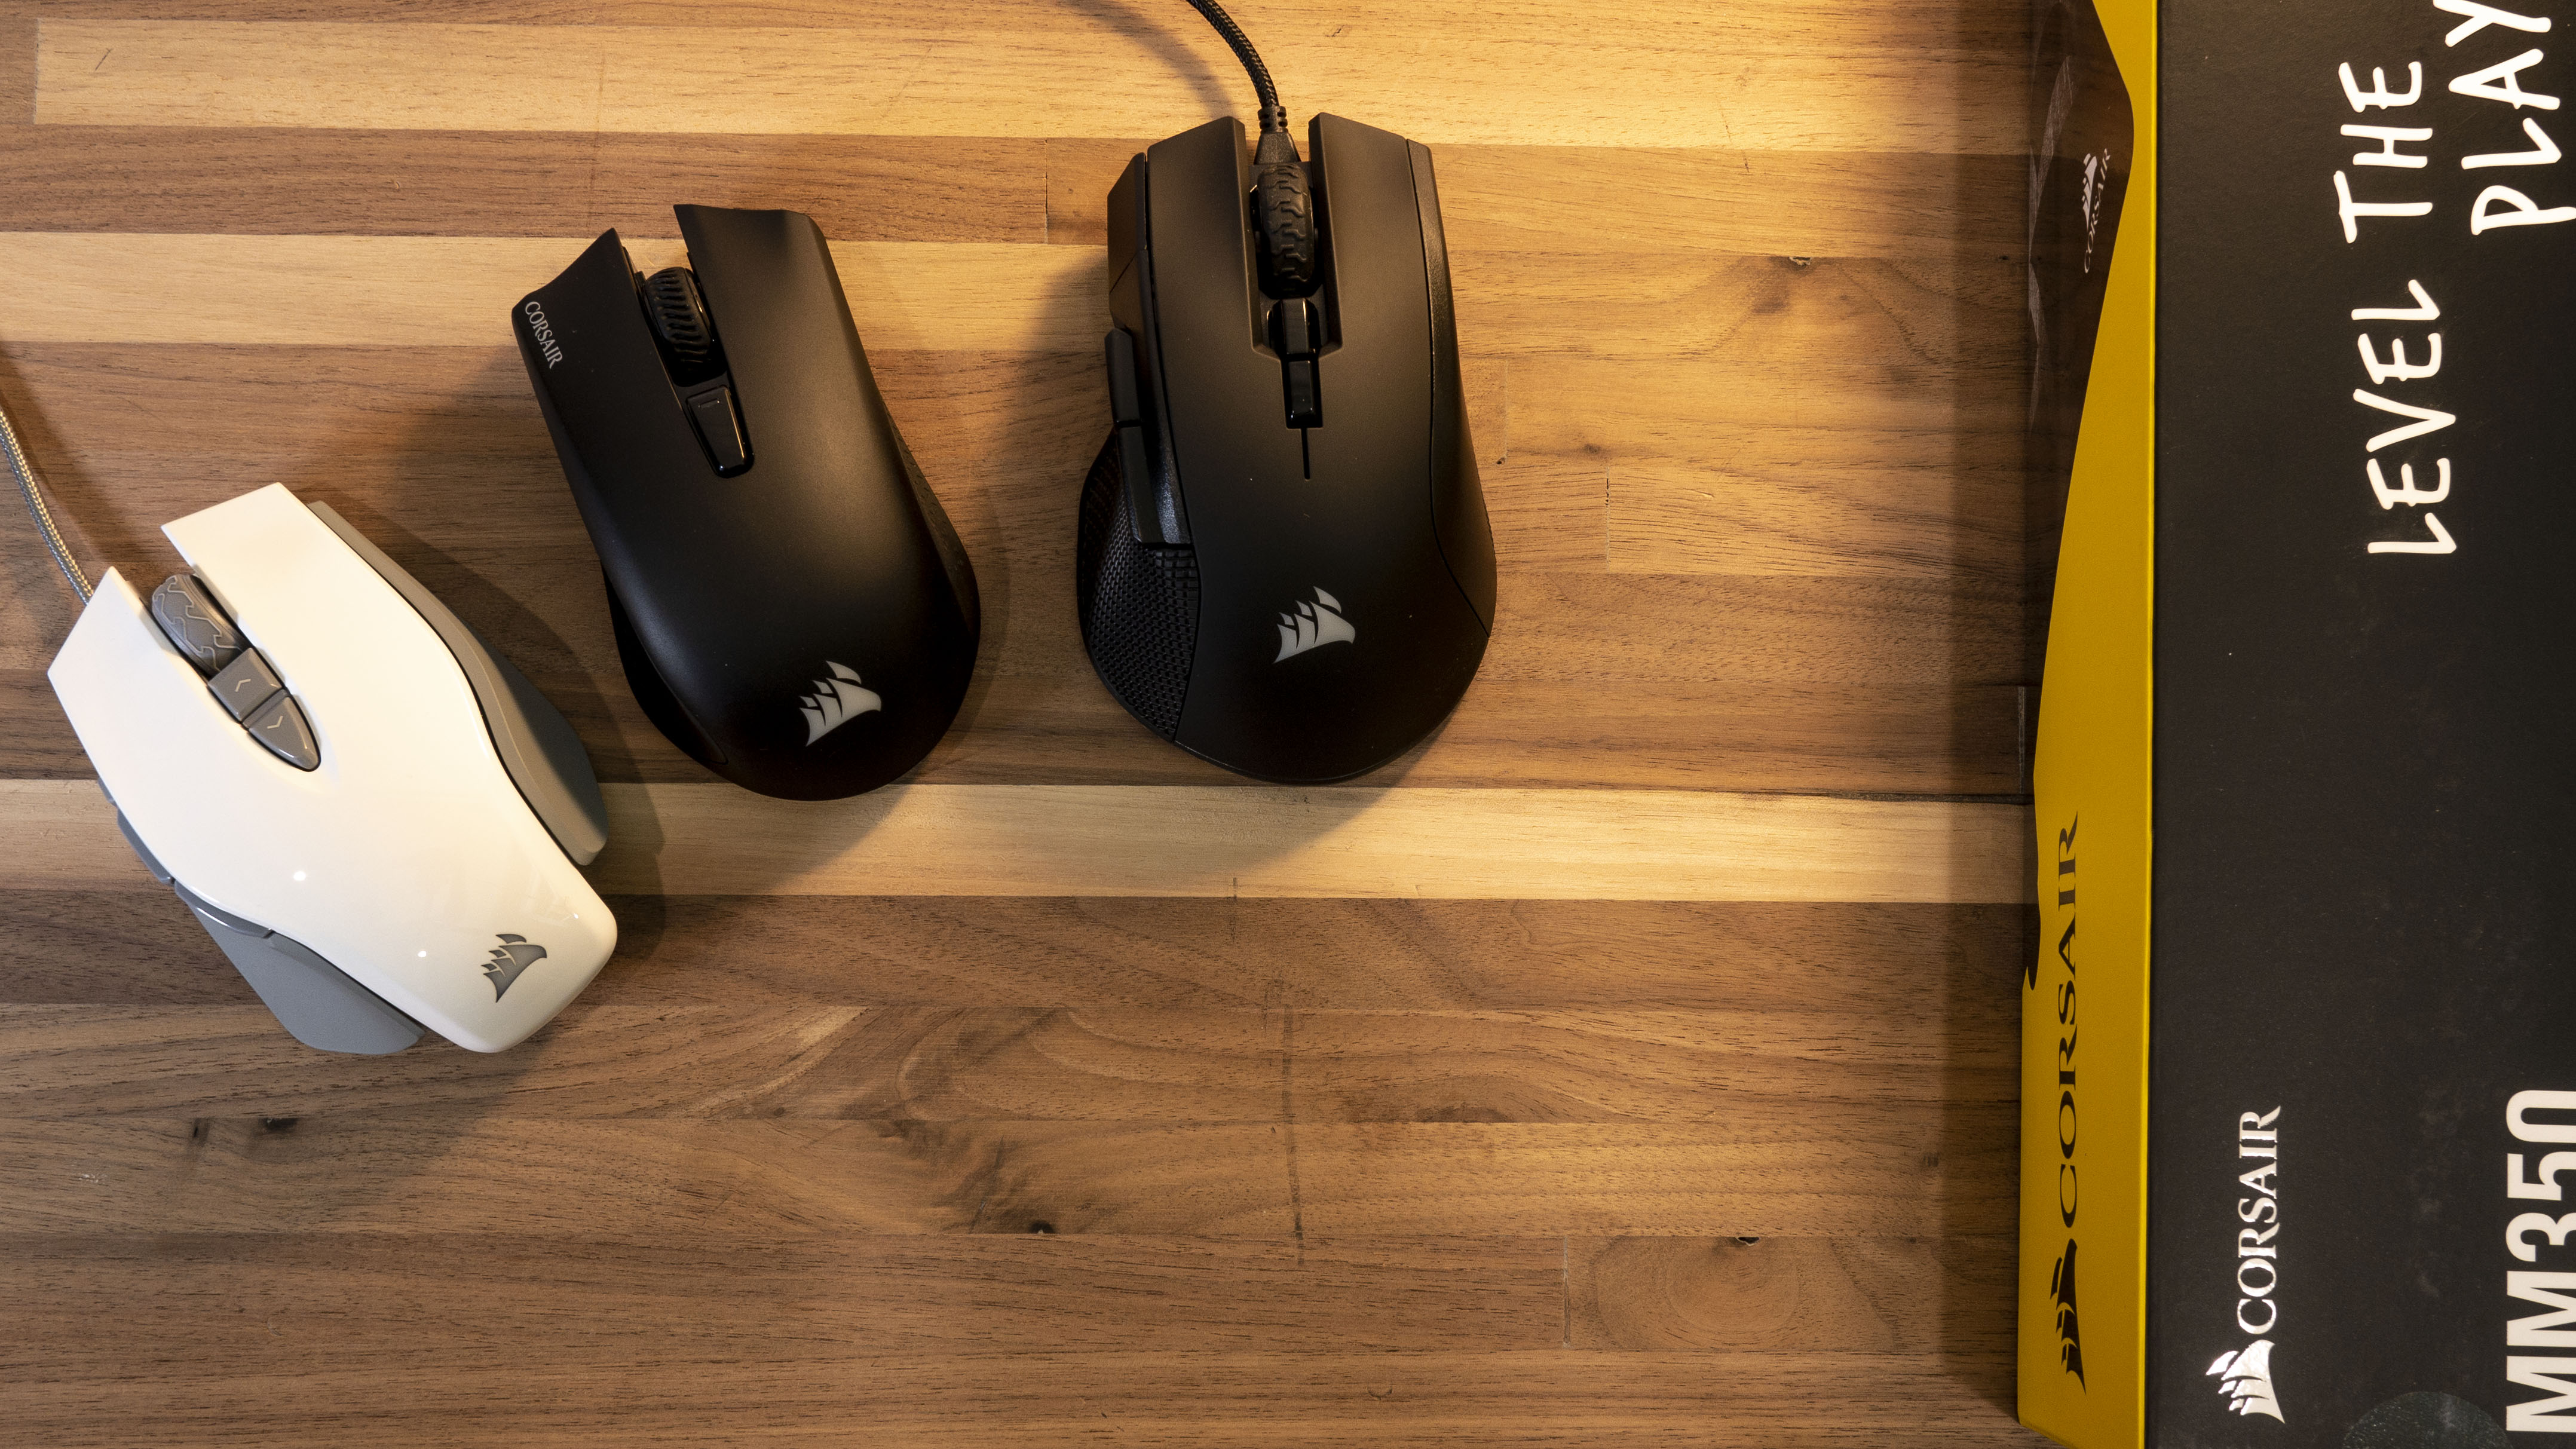 Reasons Why Best Corsair Gaming Mice Is Getting More Popular In The Past Decade.